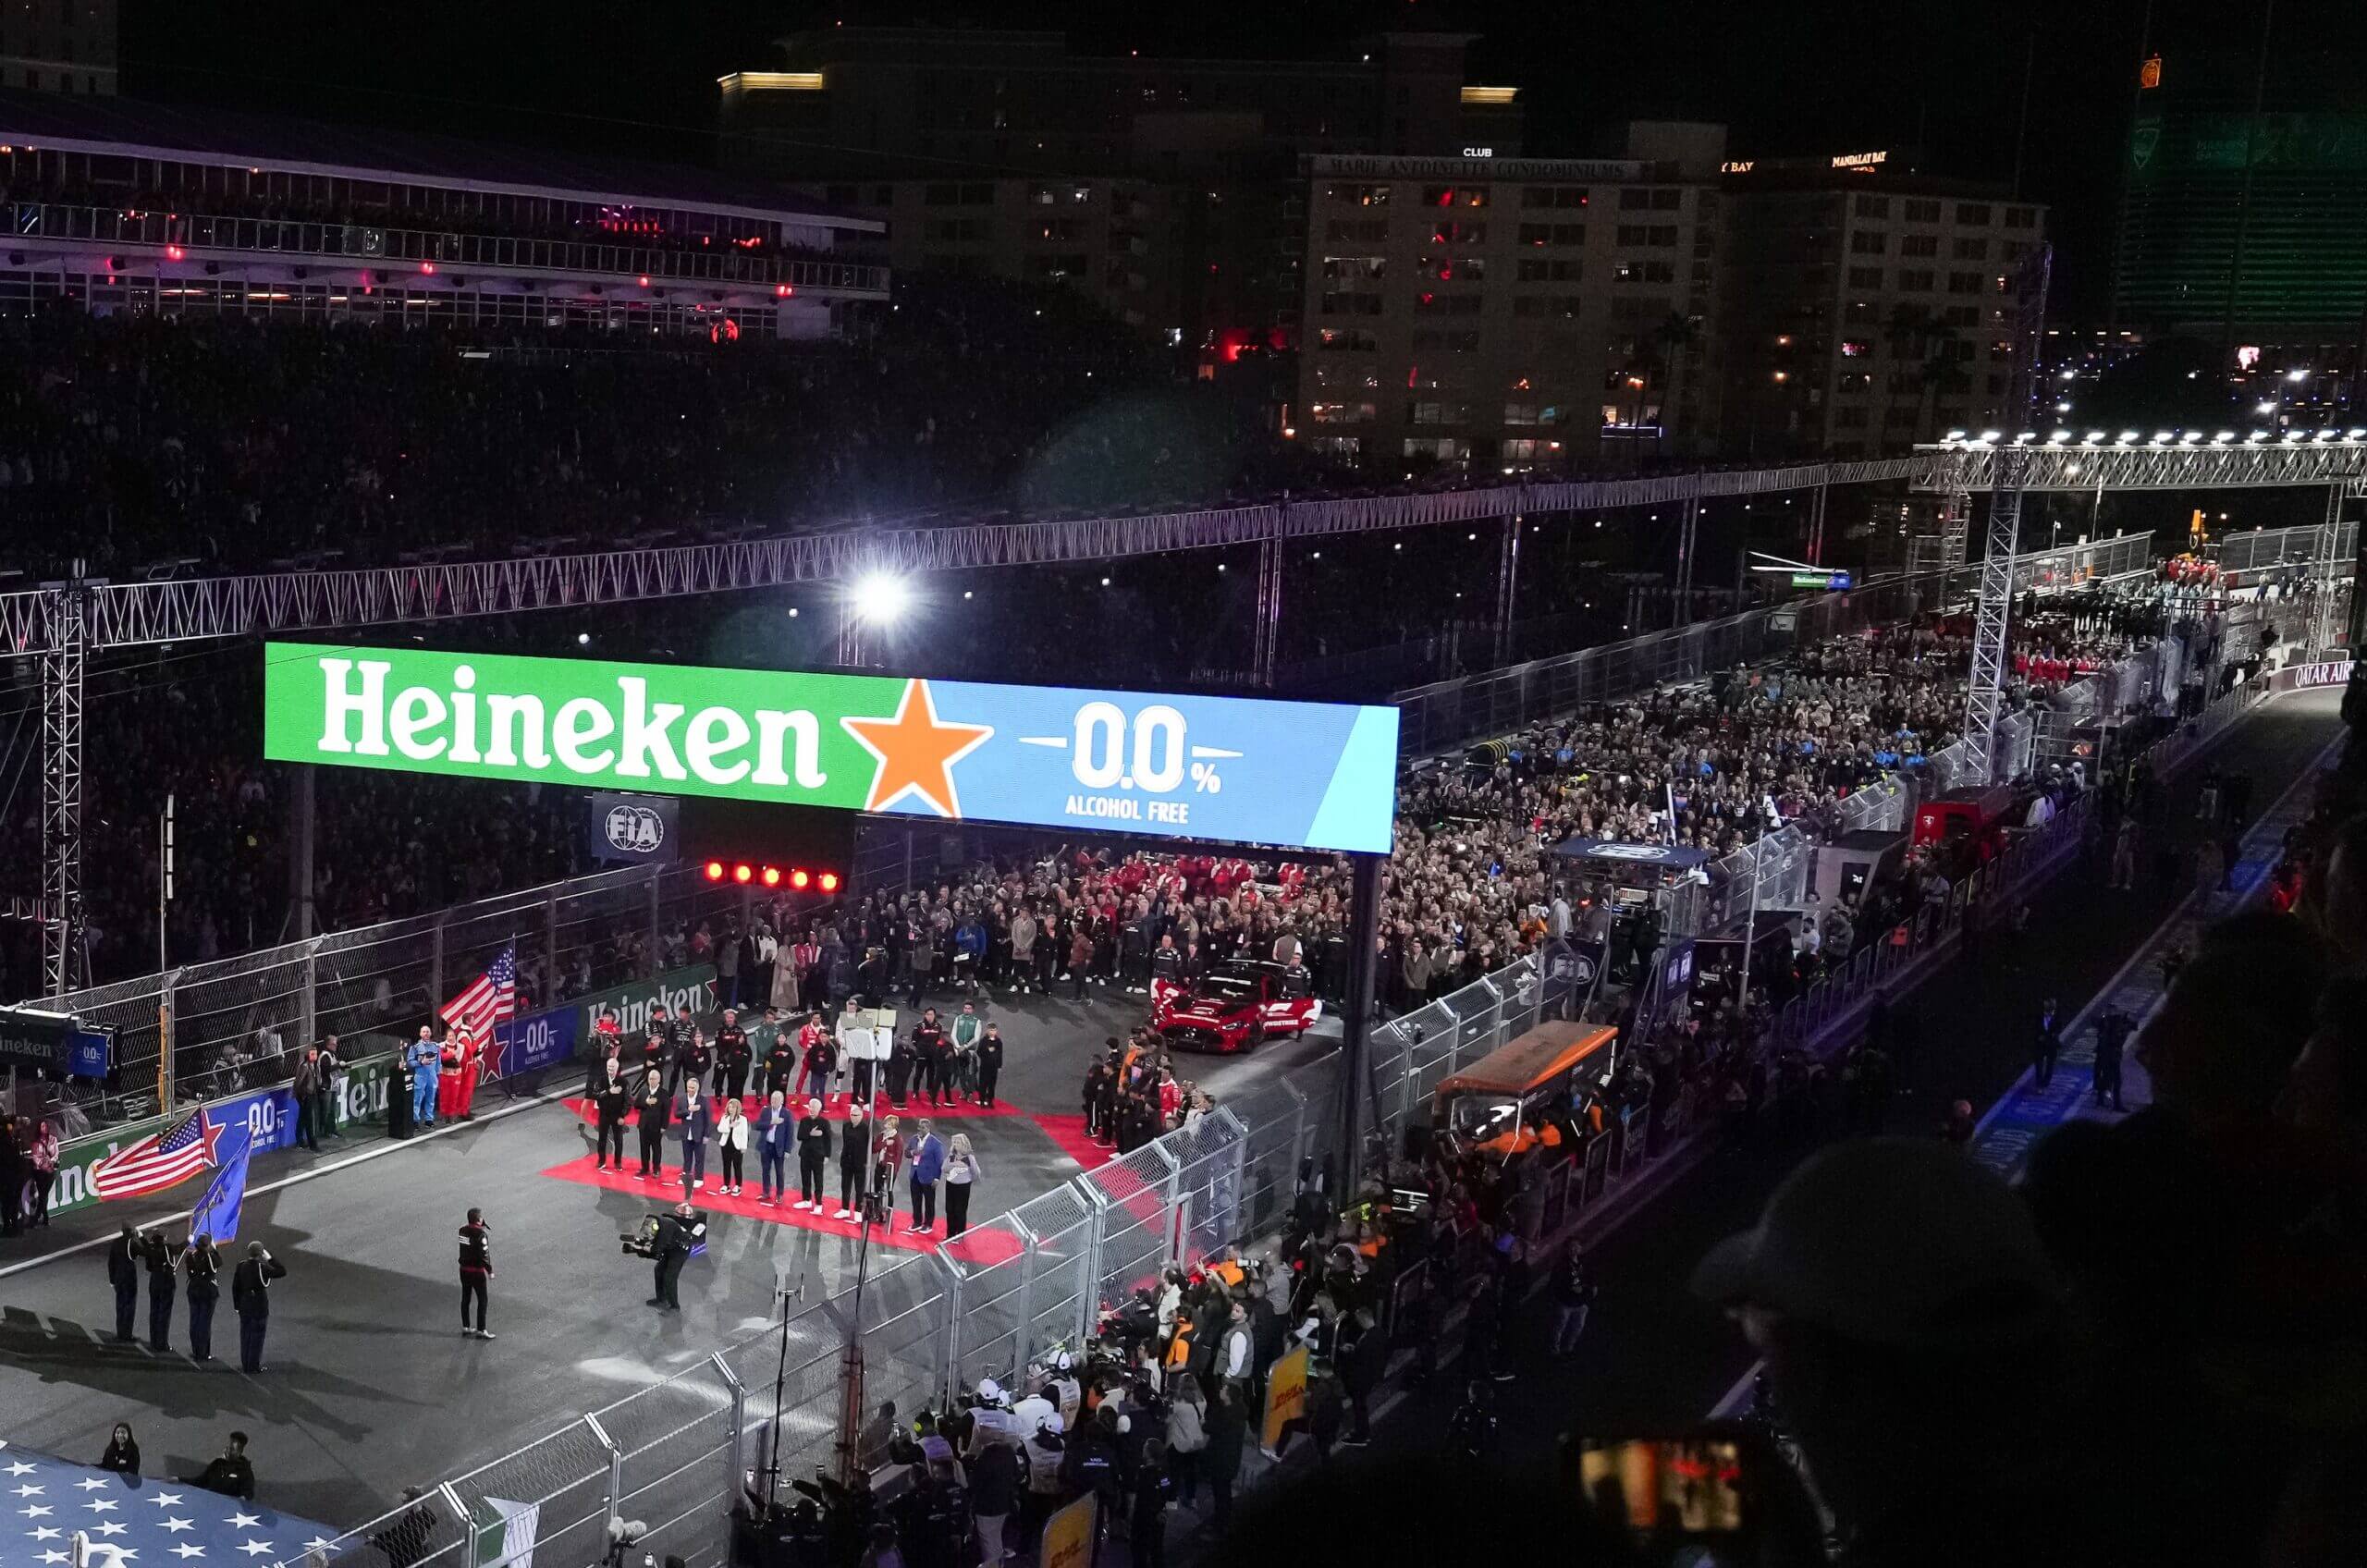 LAS VEGAS, NEVADA - NOVEMBER 18: A general view of the national anthem prior to the F1 Grand Prix of Las Vegas at Las Vegas Strip Circuit on November 18, 2023 in Las Vegas, Nevada. (Photo by Alex Bierens de Haan/Getty Images for Heineken)